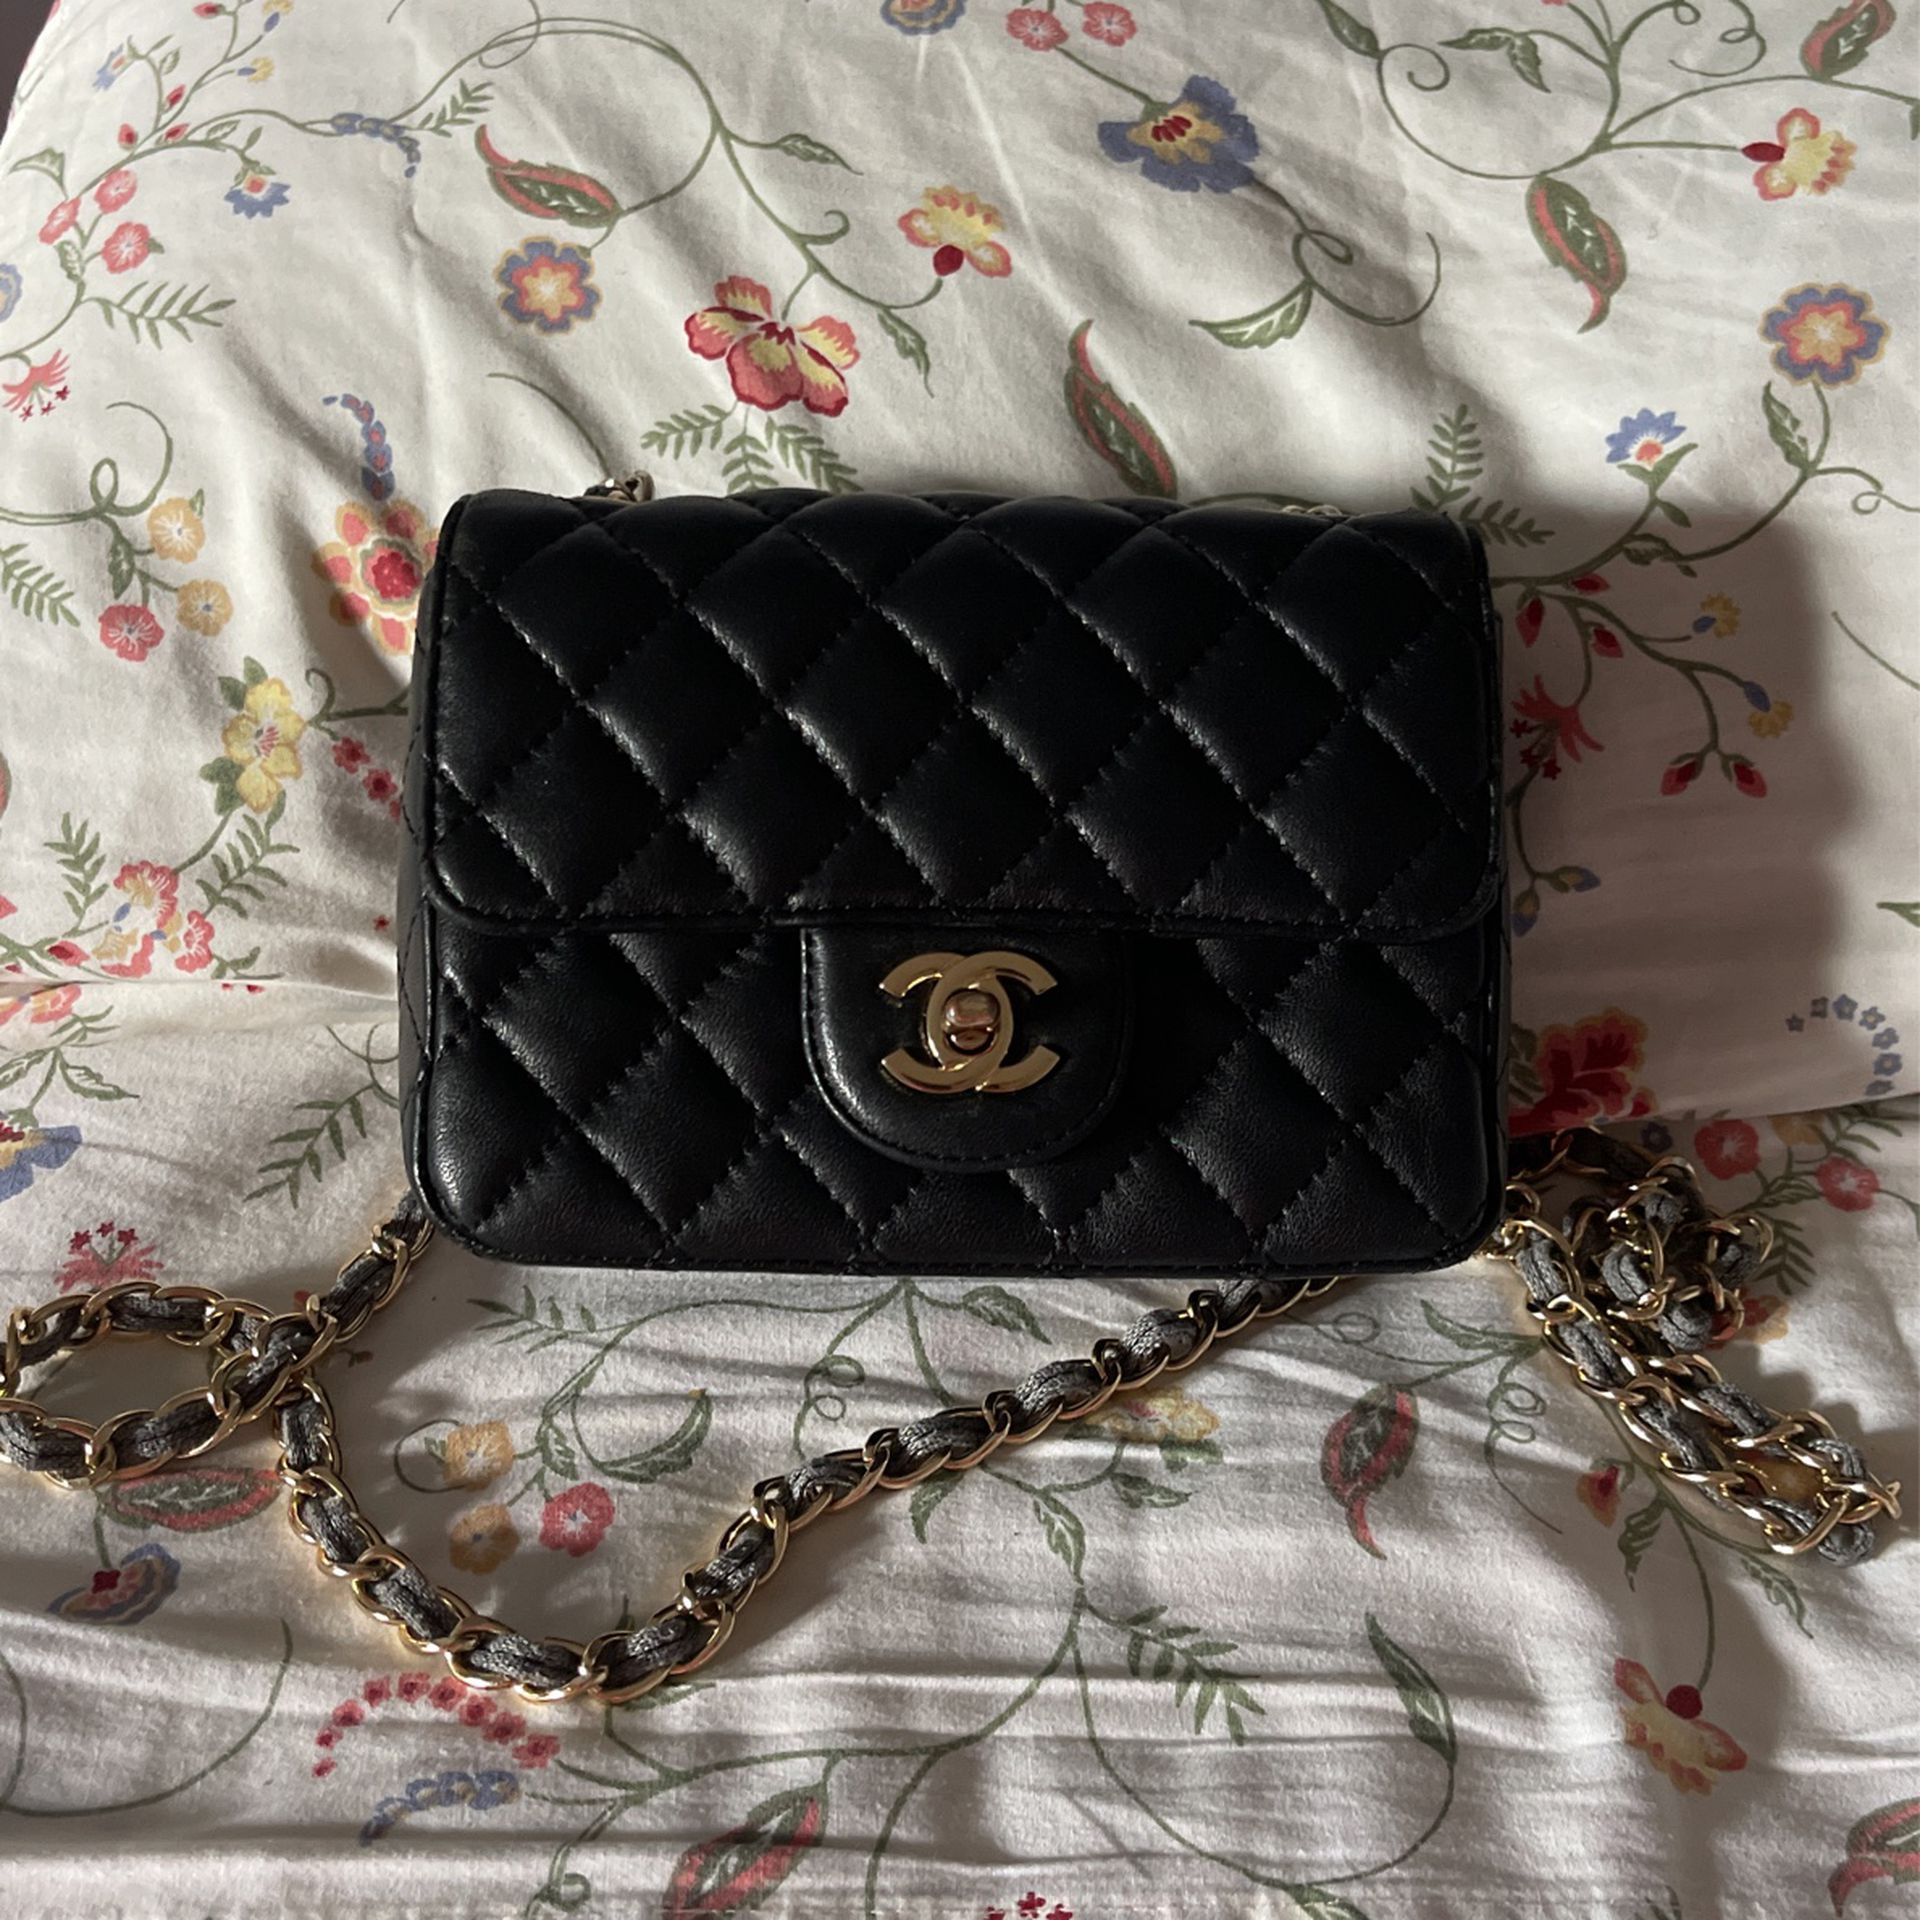 chanel bag new with tag